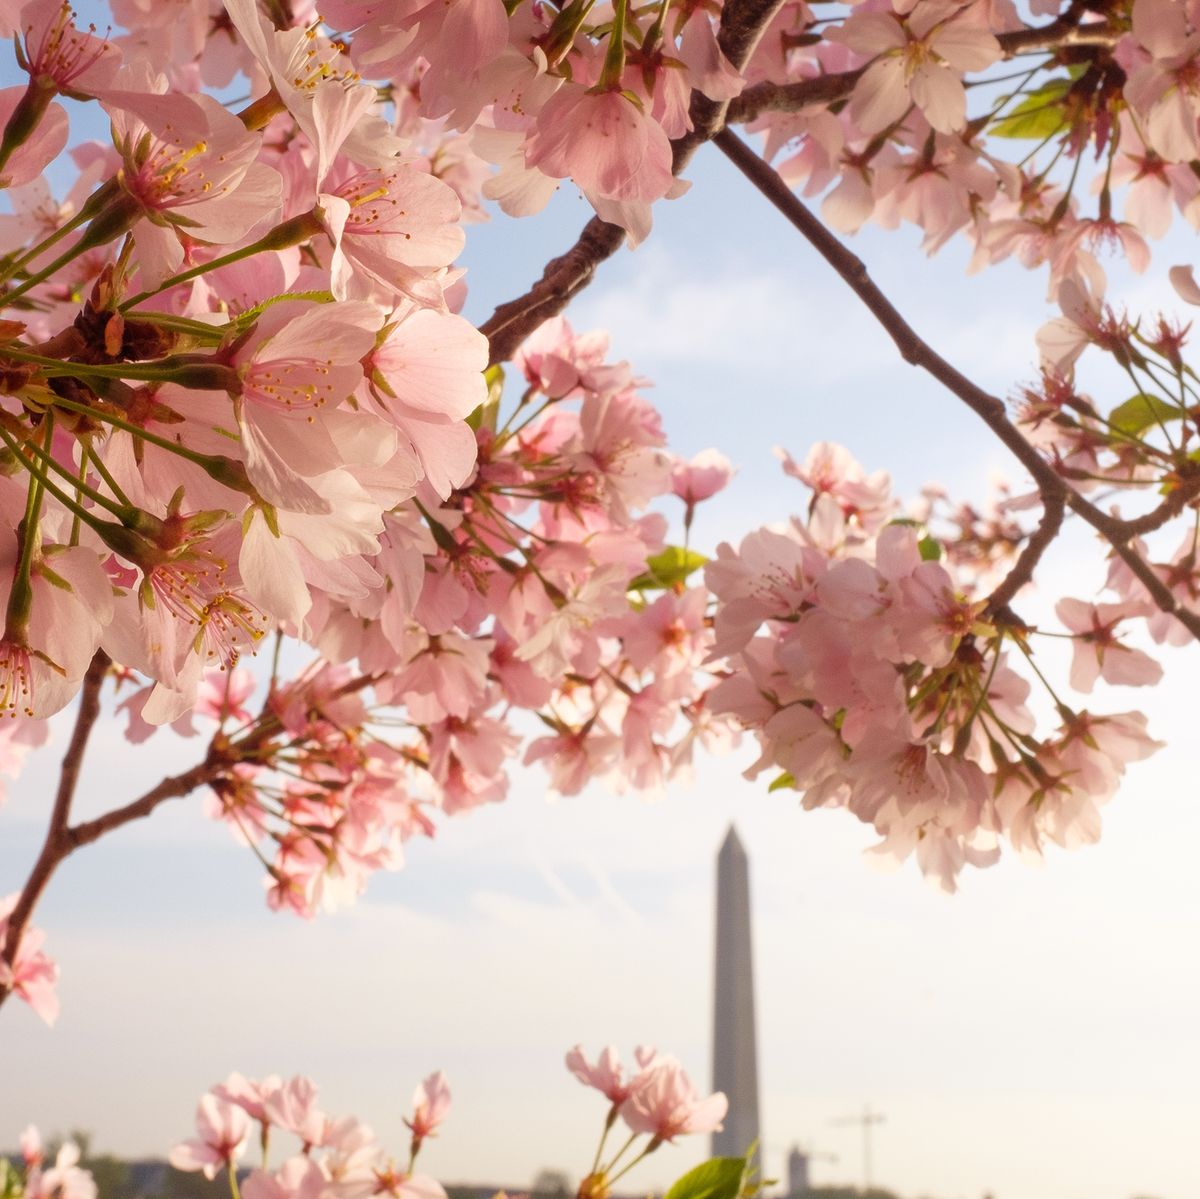 Cherry blossoms and the Washington Monument seen during the Cherry Blossom Festival